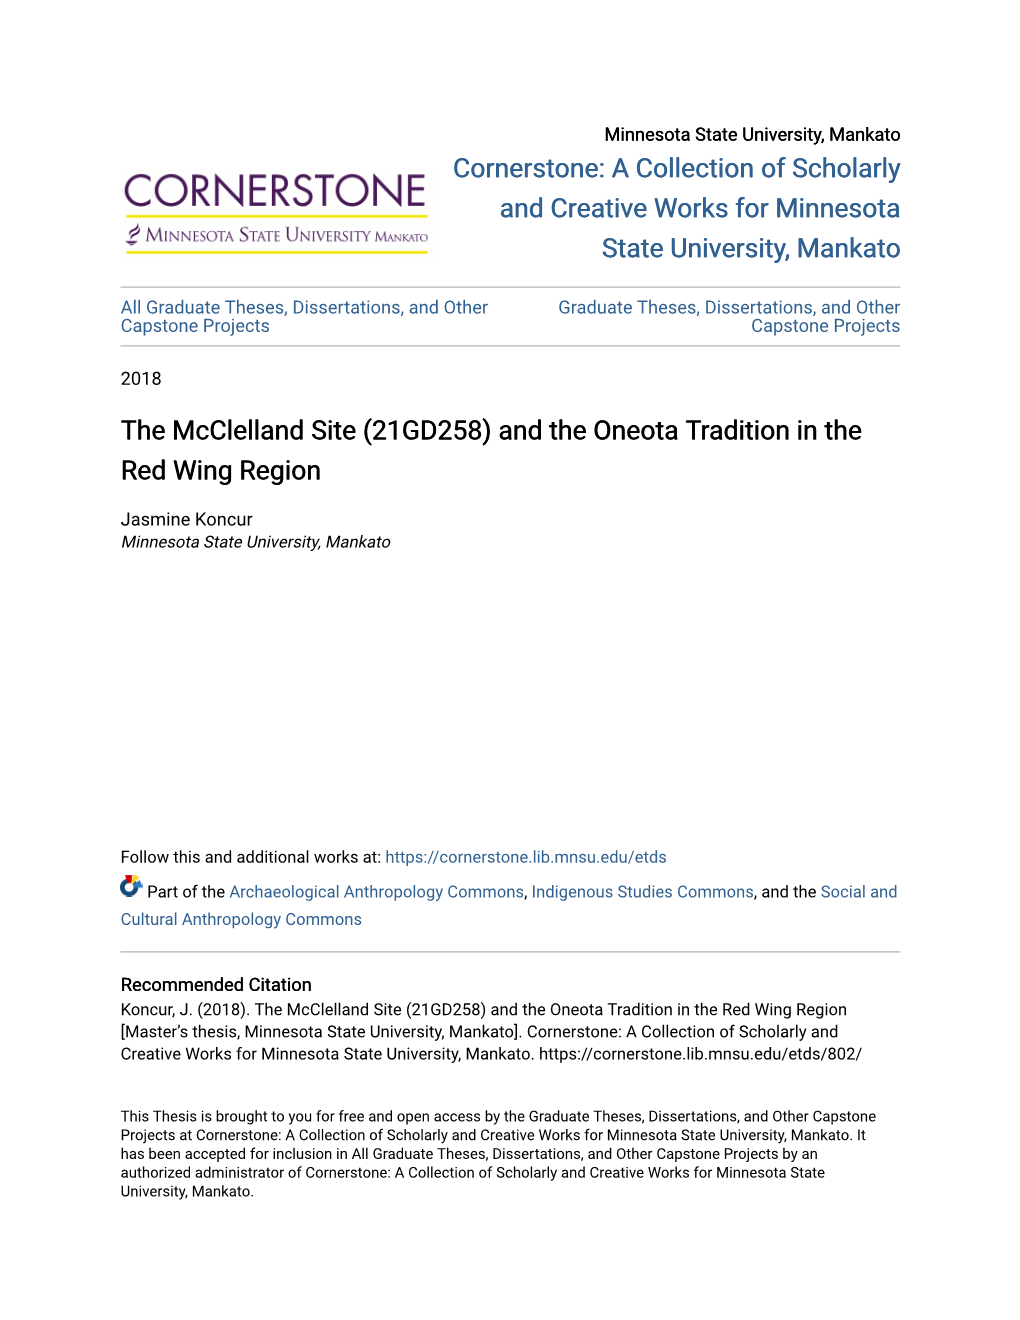 The Mcclelland Site (21GD258) and the Oneota Tradition in the Red Wing Region